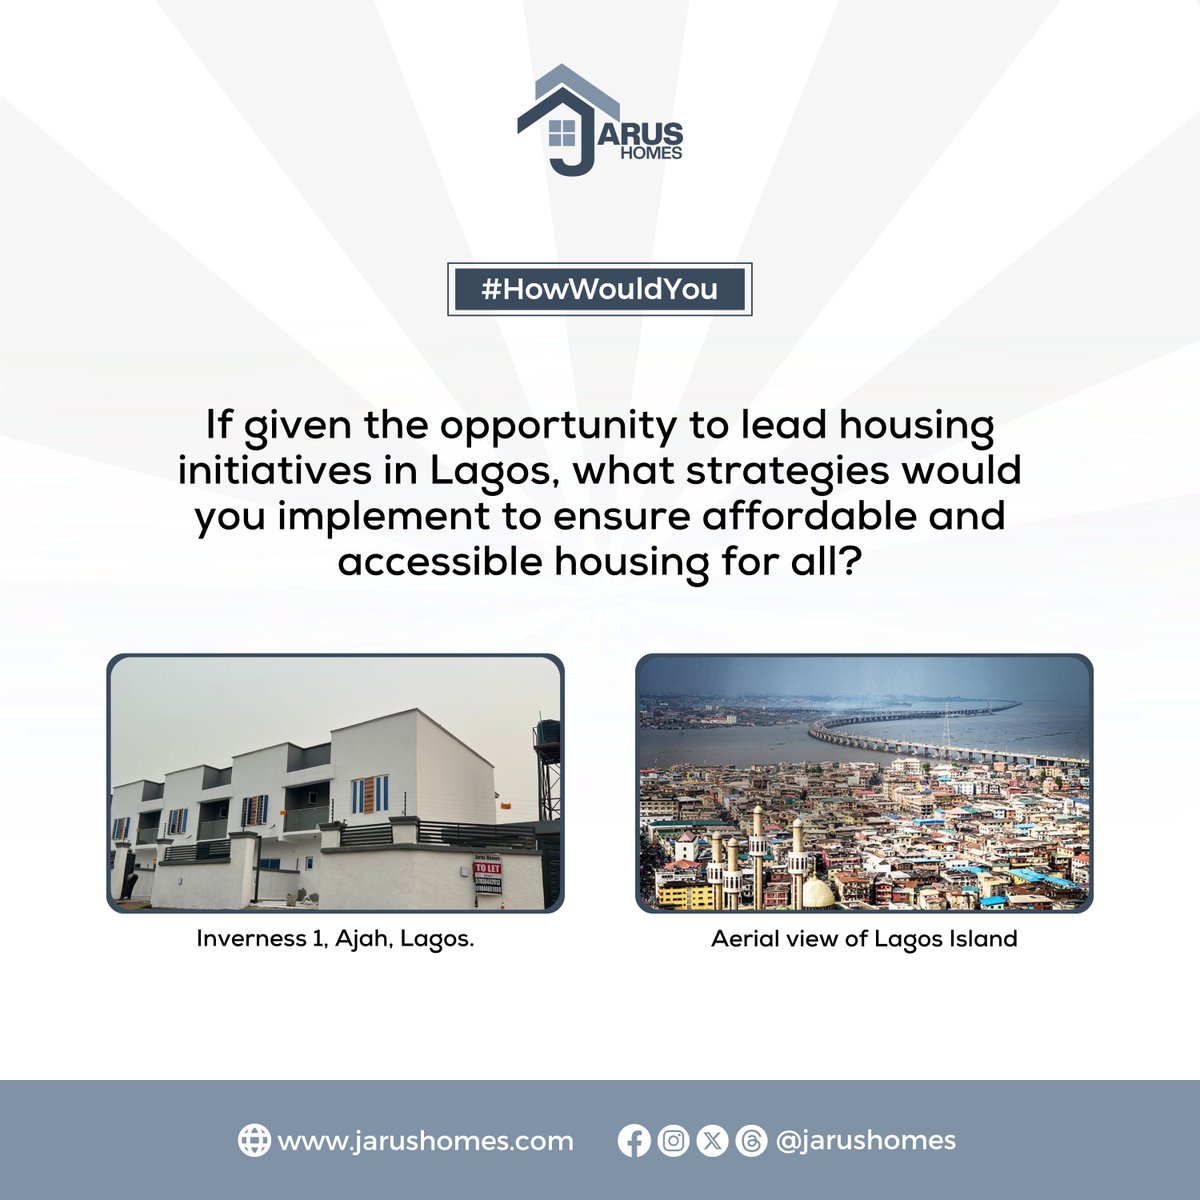 Calling all Lagosians! If you were in charge, what initiatives would you employ? Share your ideas and strategies in the comments below! #HowWouldYou #Trivia #JarusHomes